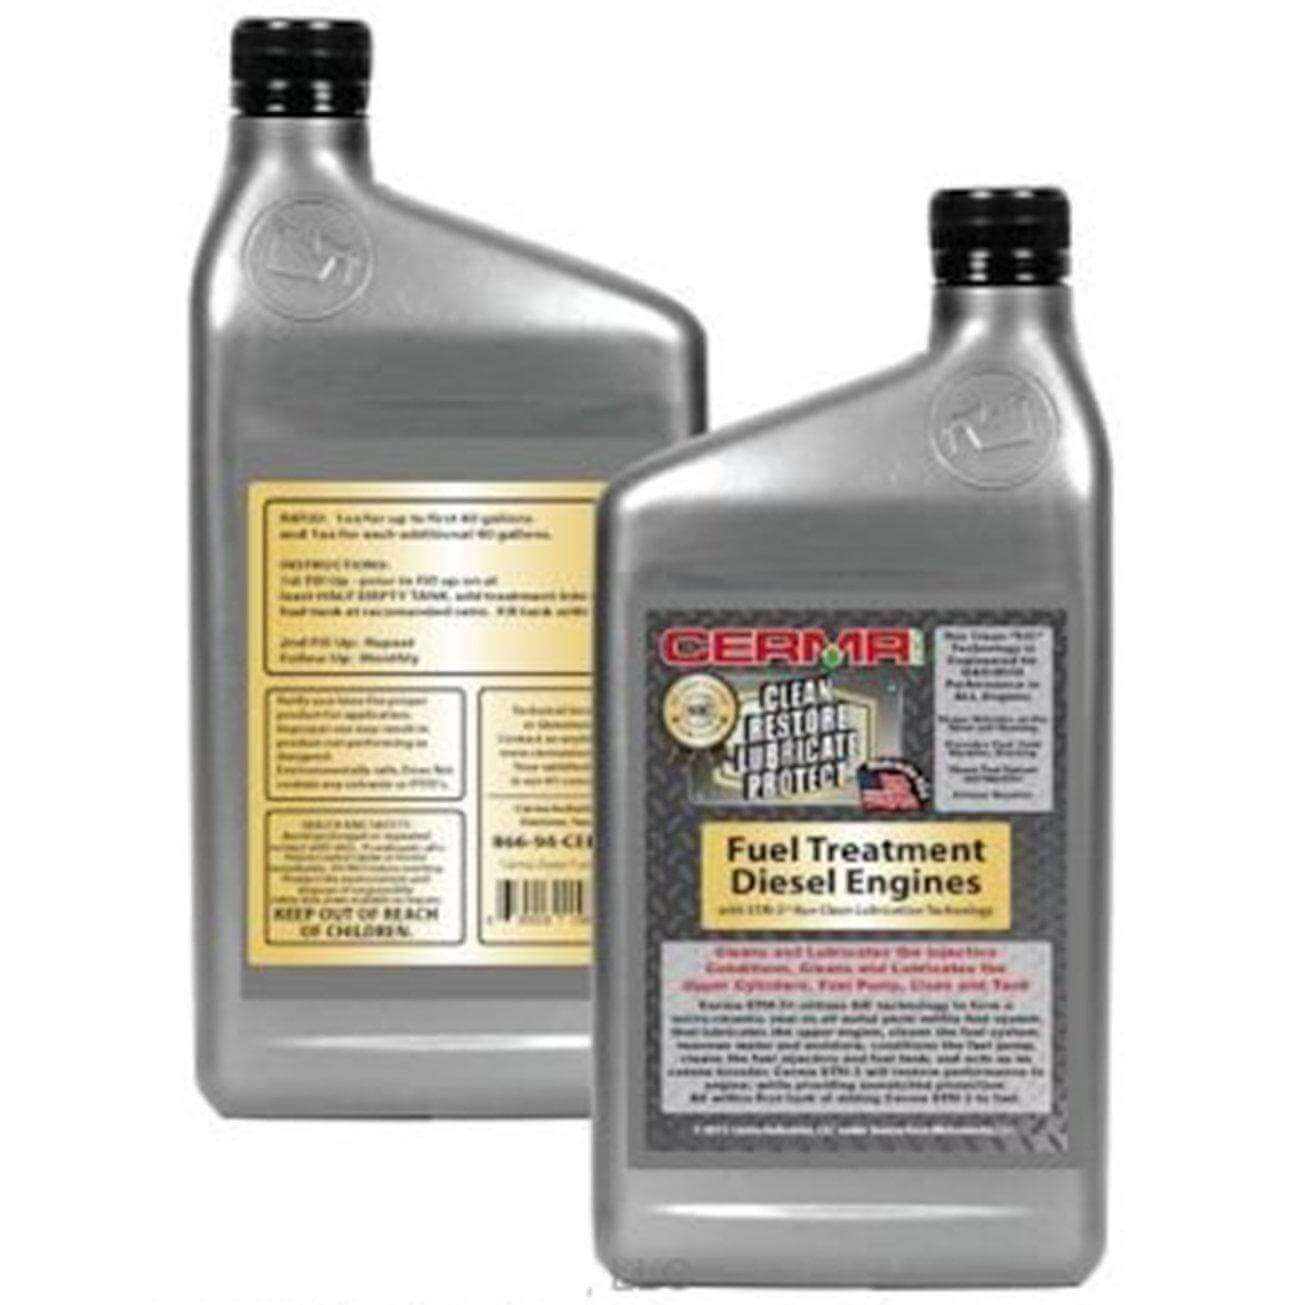 Cerma Ceramic Fuel Treatment for Diesel Engines at $126.56 only from cermatreatment.com